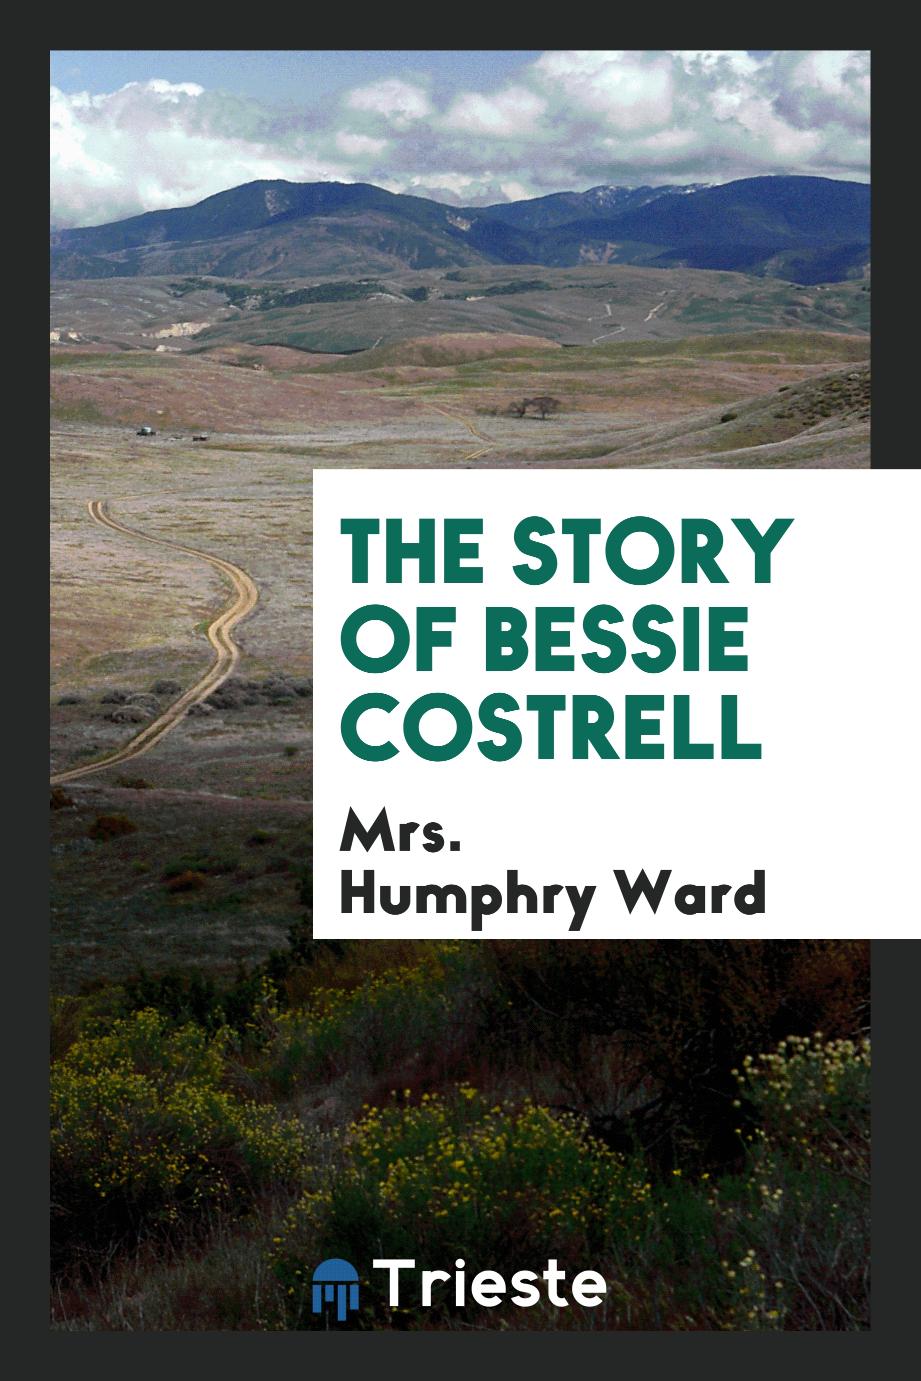 The story of Bessie Costrell